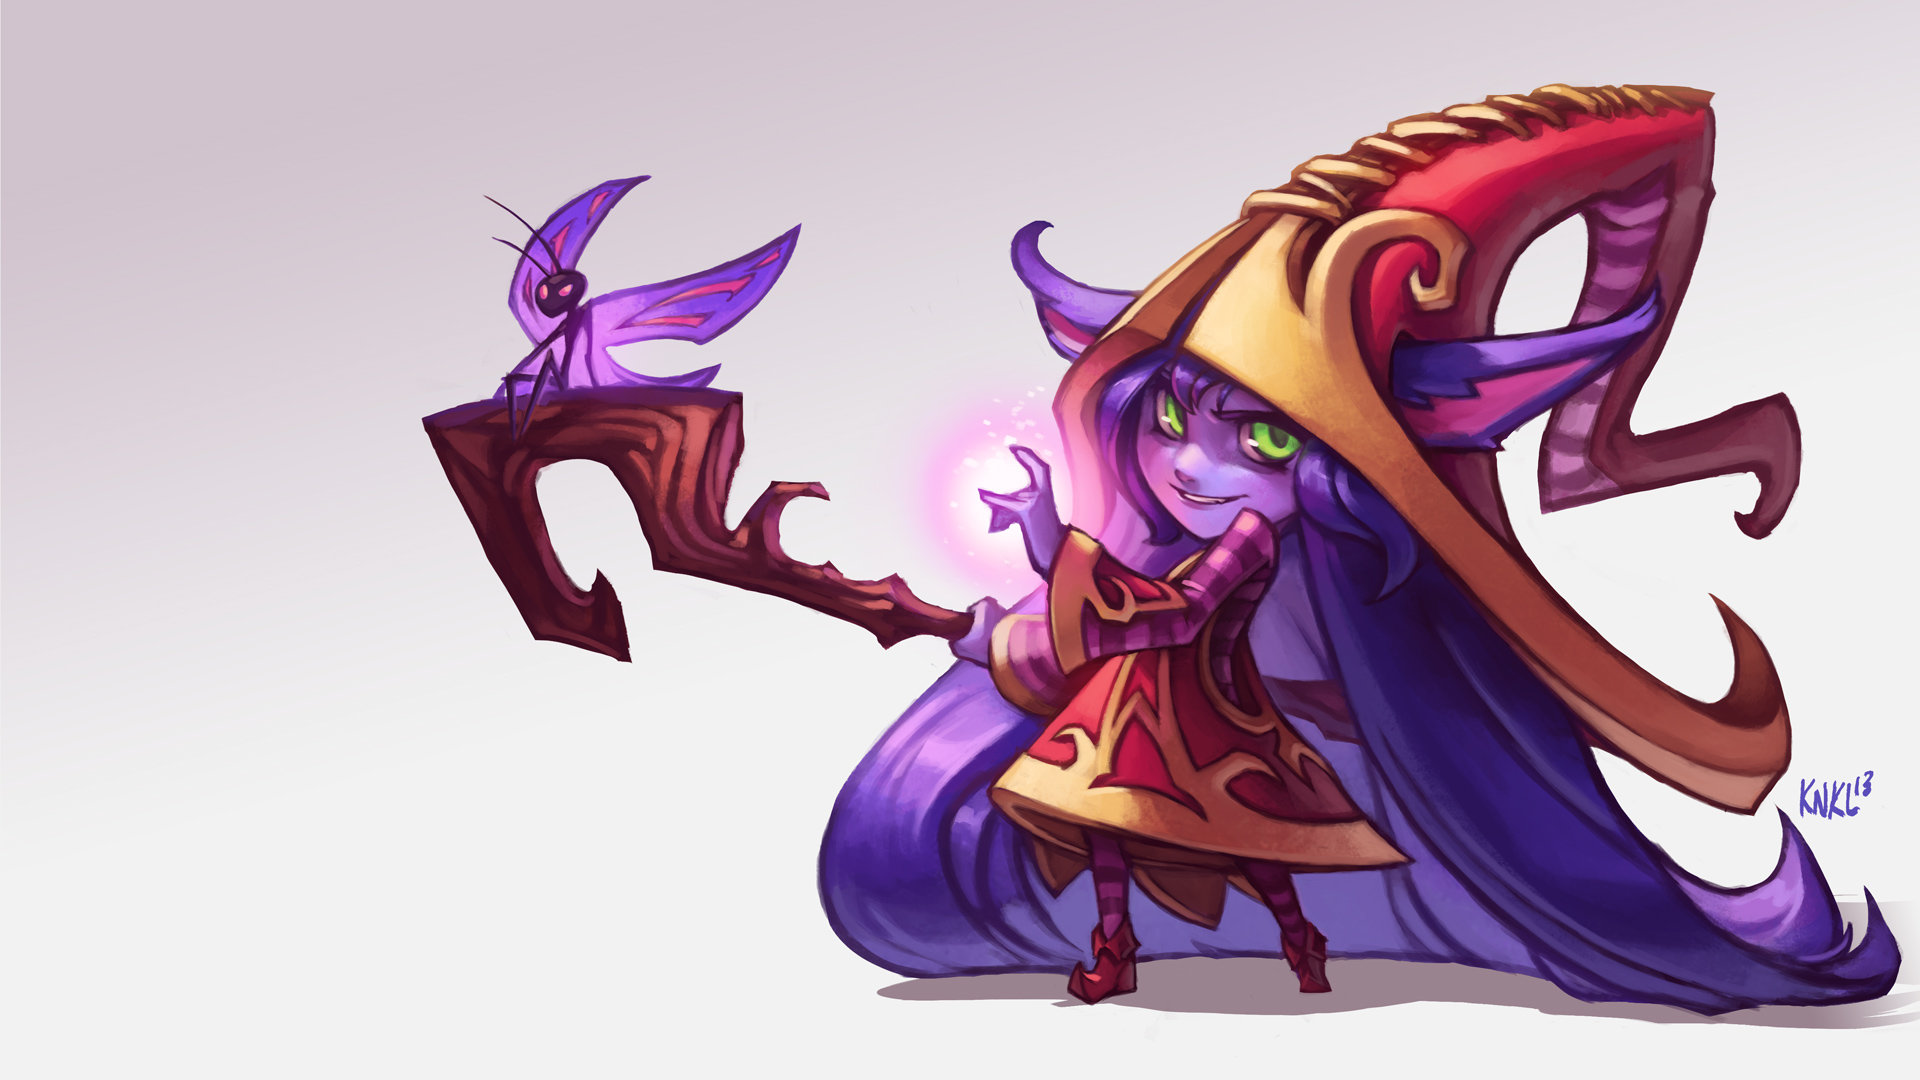 Lulu League Of Legends Wallpapers 1920x1080 Full Hd 1080p Images, Photos, Reviews